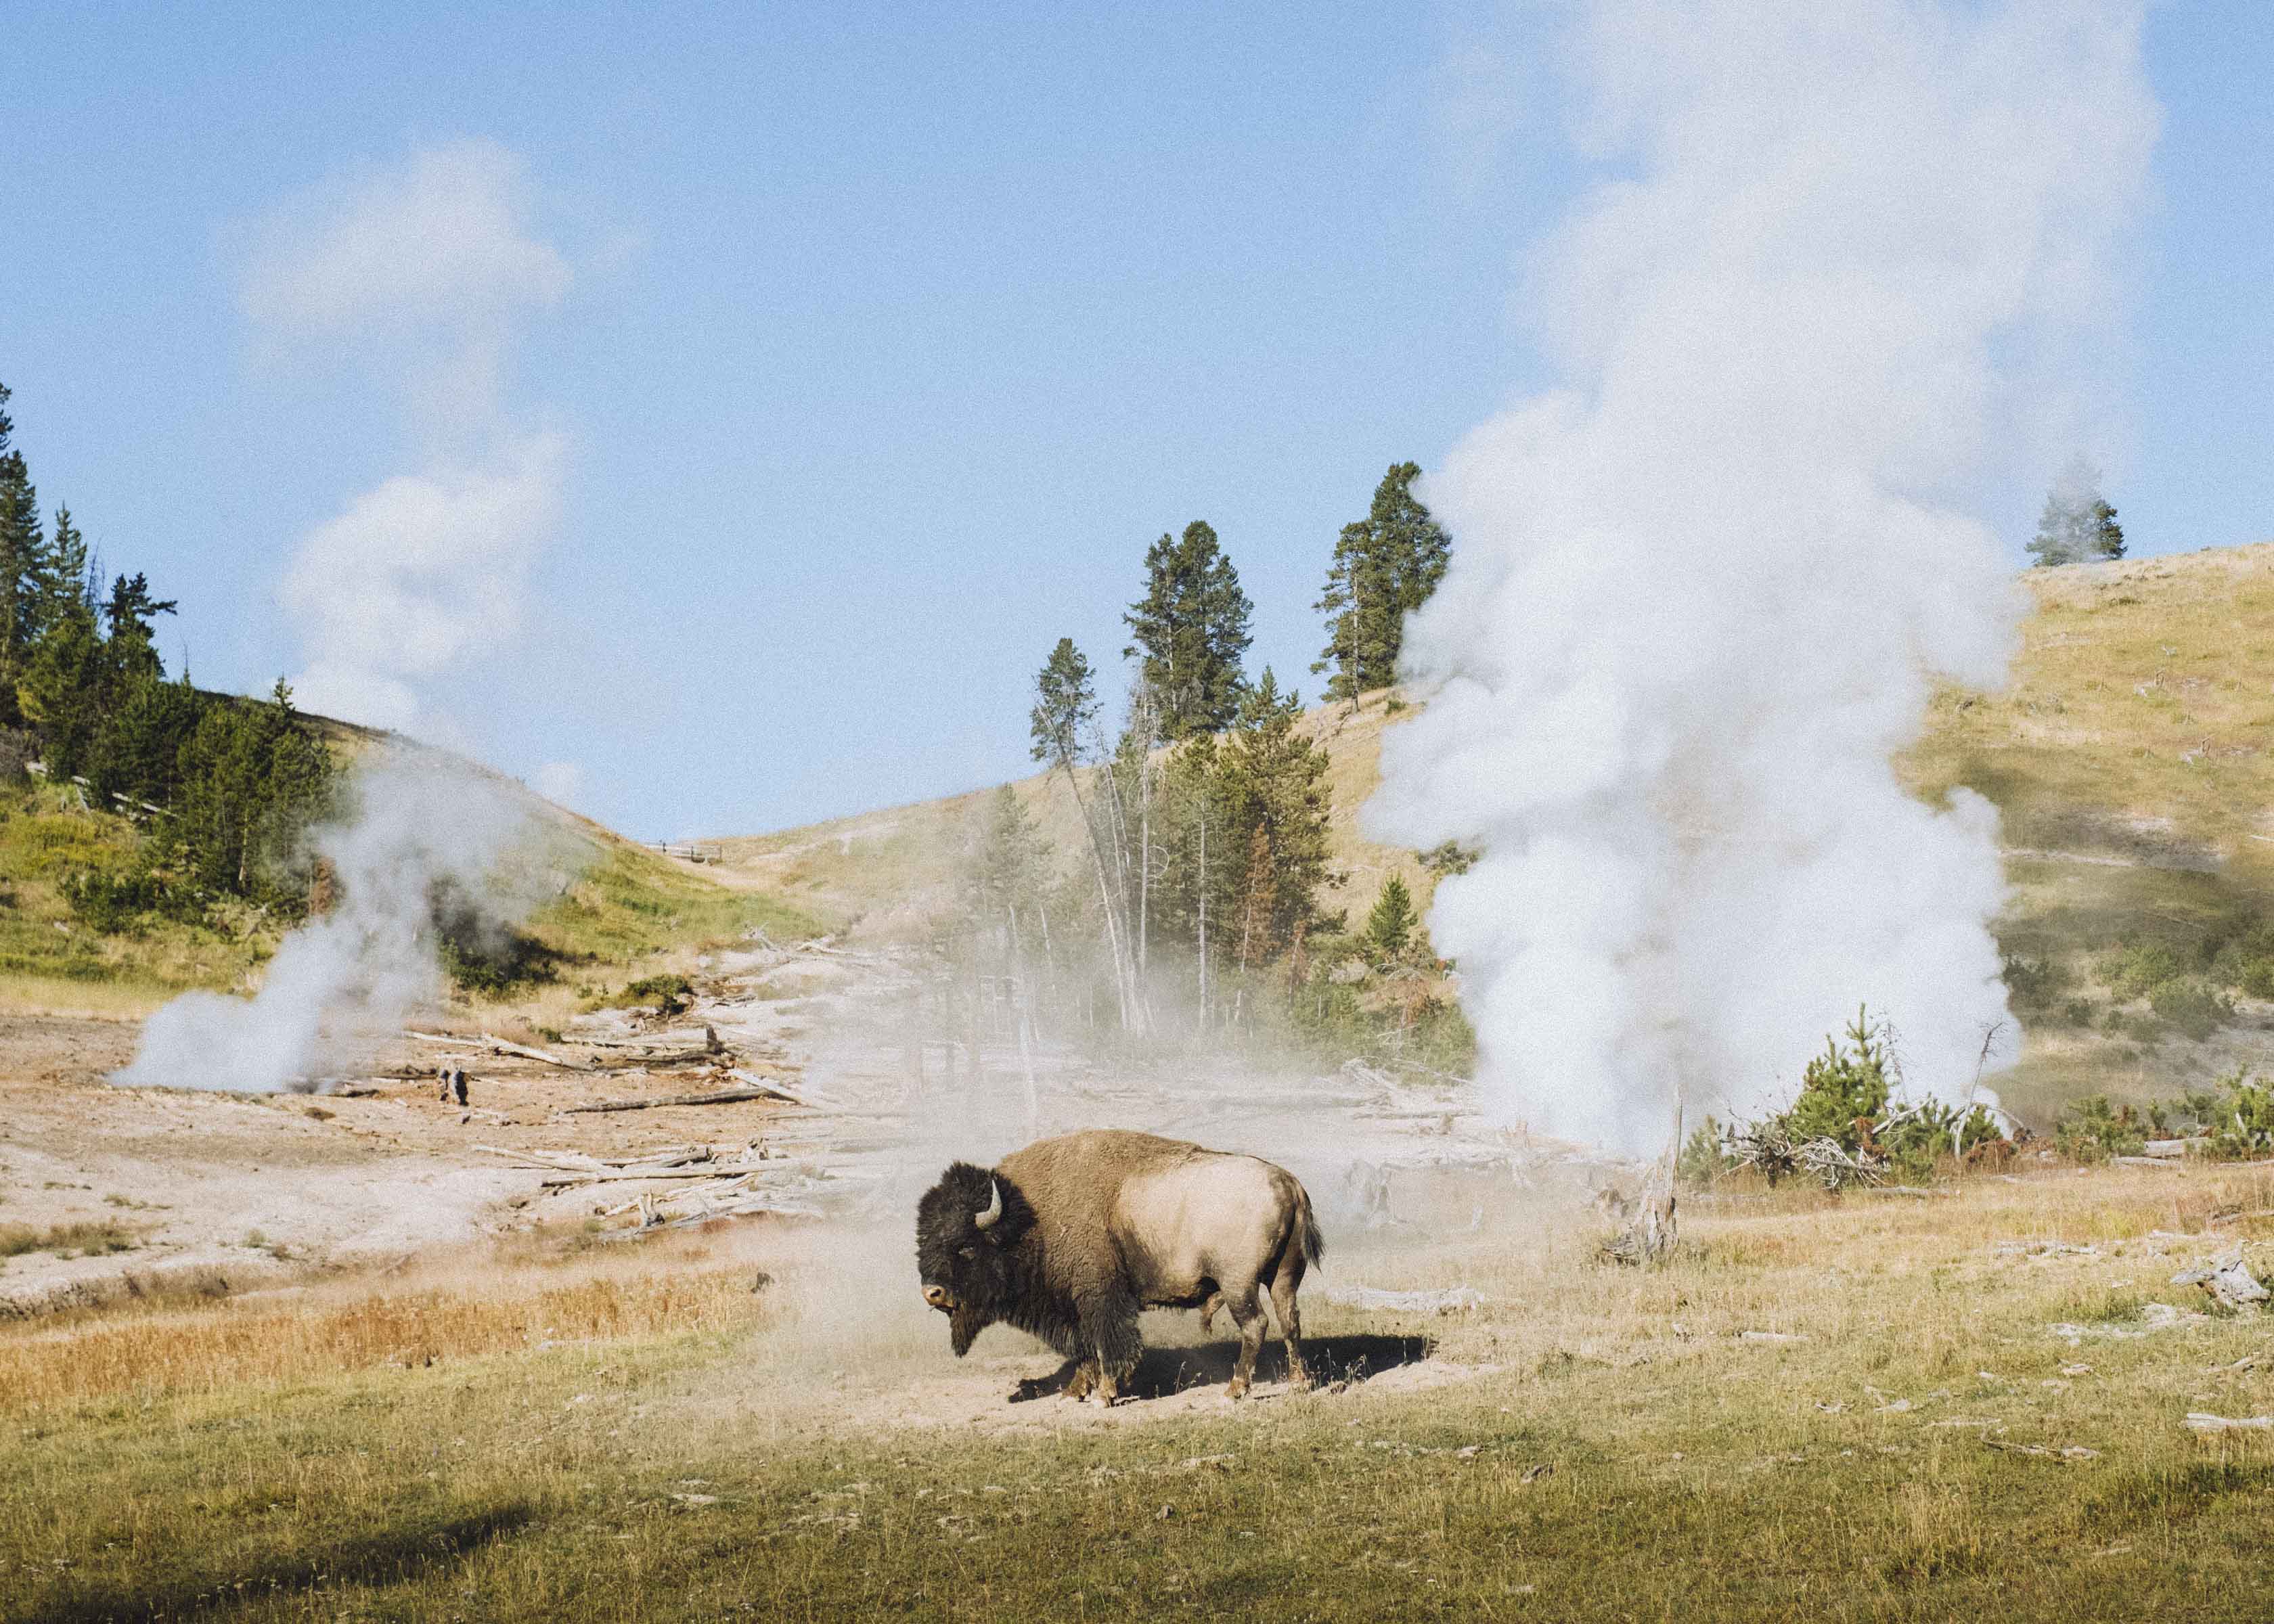 Bison surrounded by steam vents in Yellowstone National Park